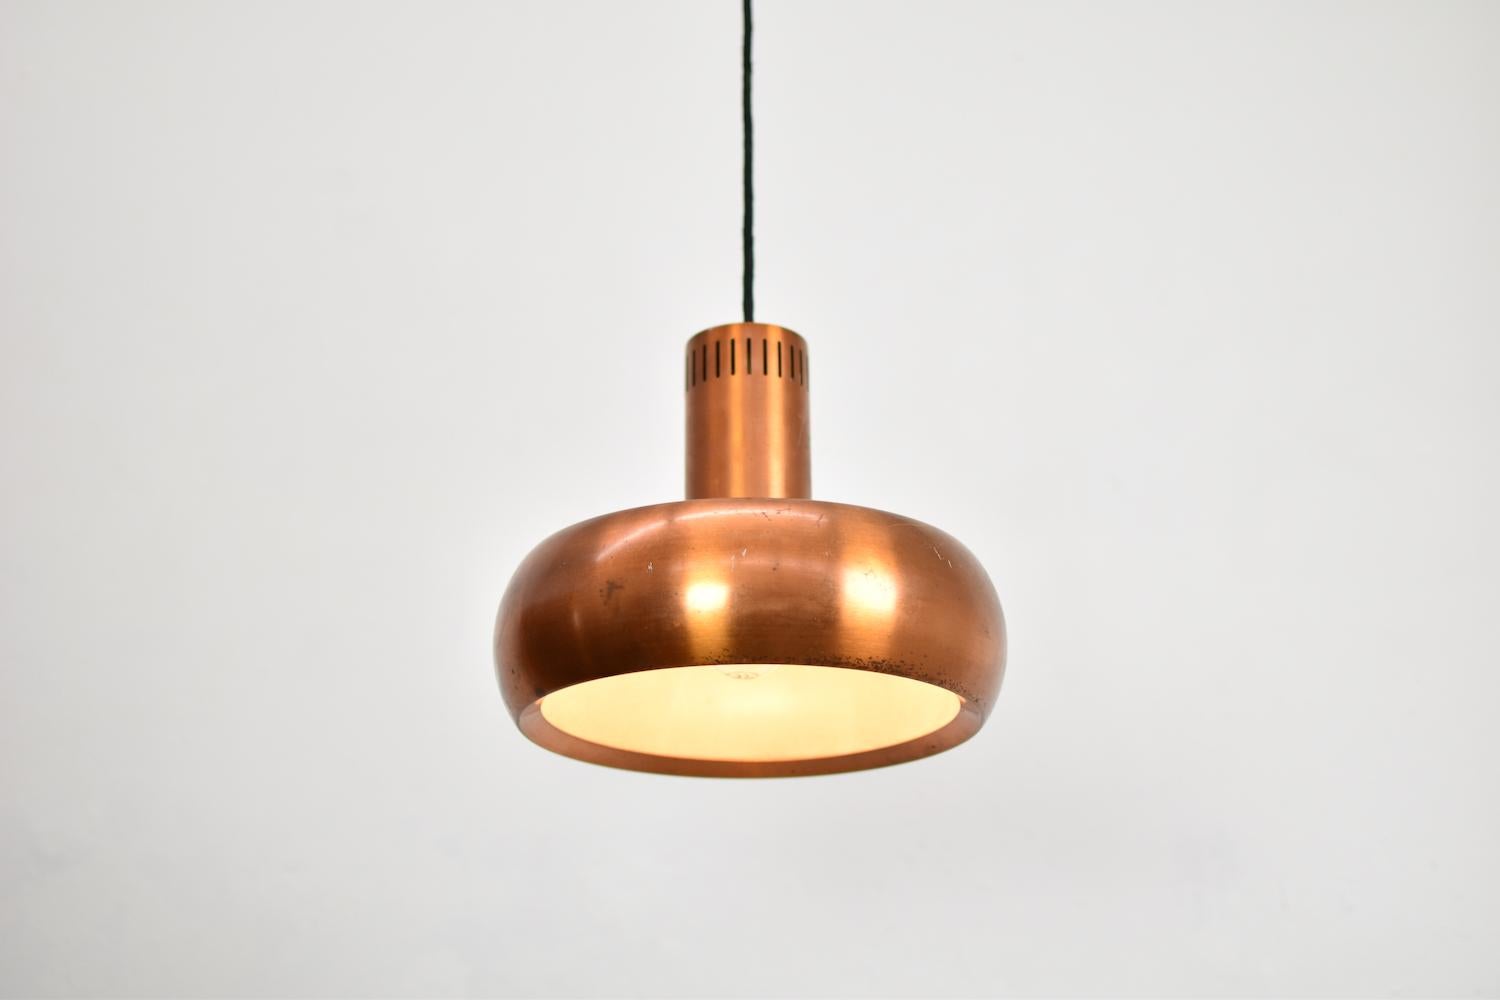 Rare and original ‘Golf’ pendant by Jo Hammerborg for Fog & Mørup, Denmark, 1970s. This pendant is made out of copper and is very elegant. Some normal signs of age and use.